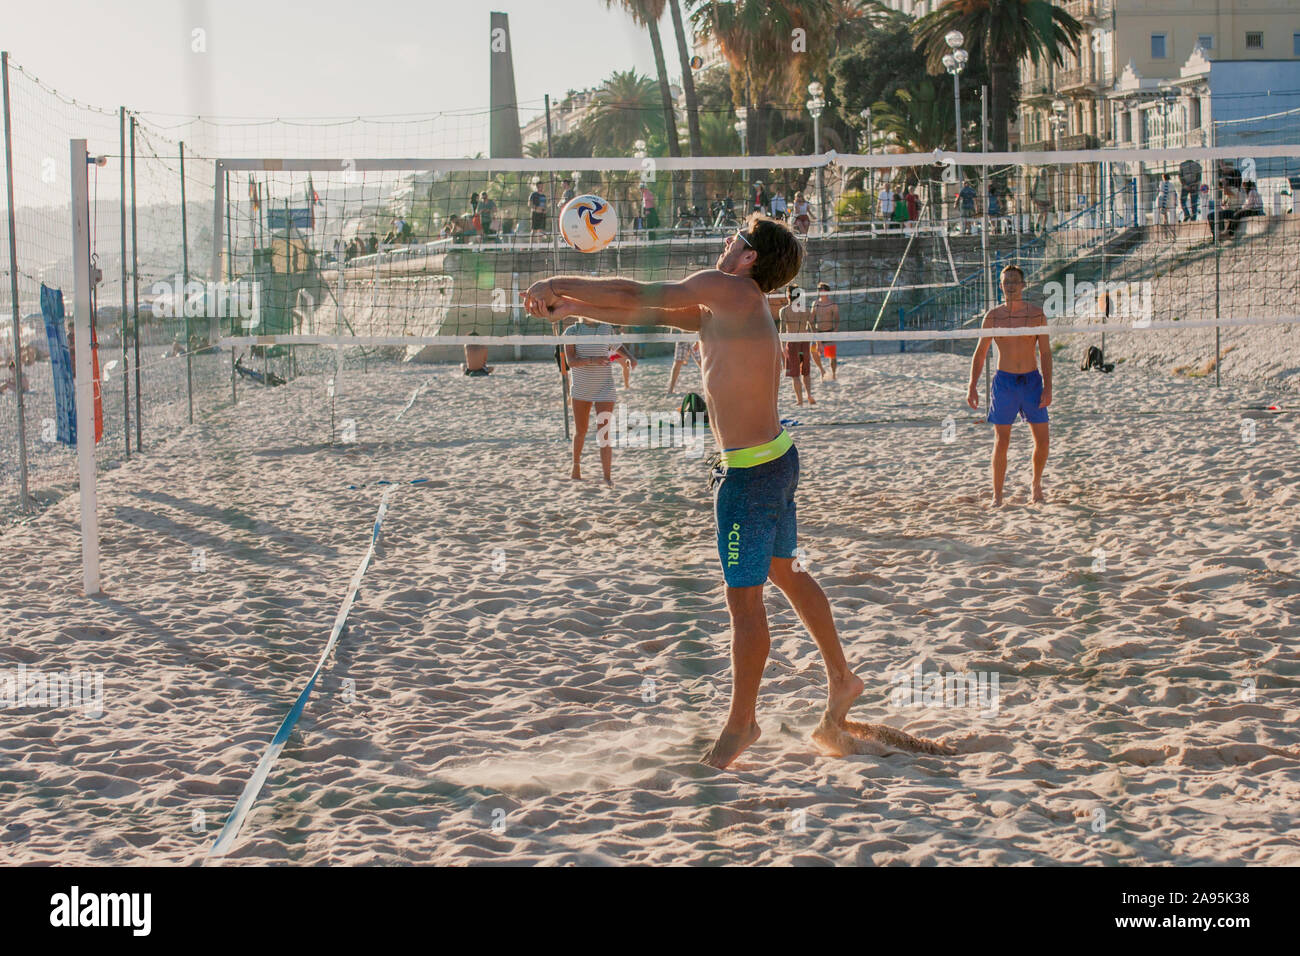 Nice, Provence / France - September 28, 2018: Young people on the beach playing beach volleyball Stock Photo